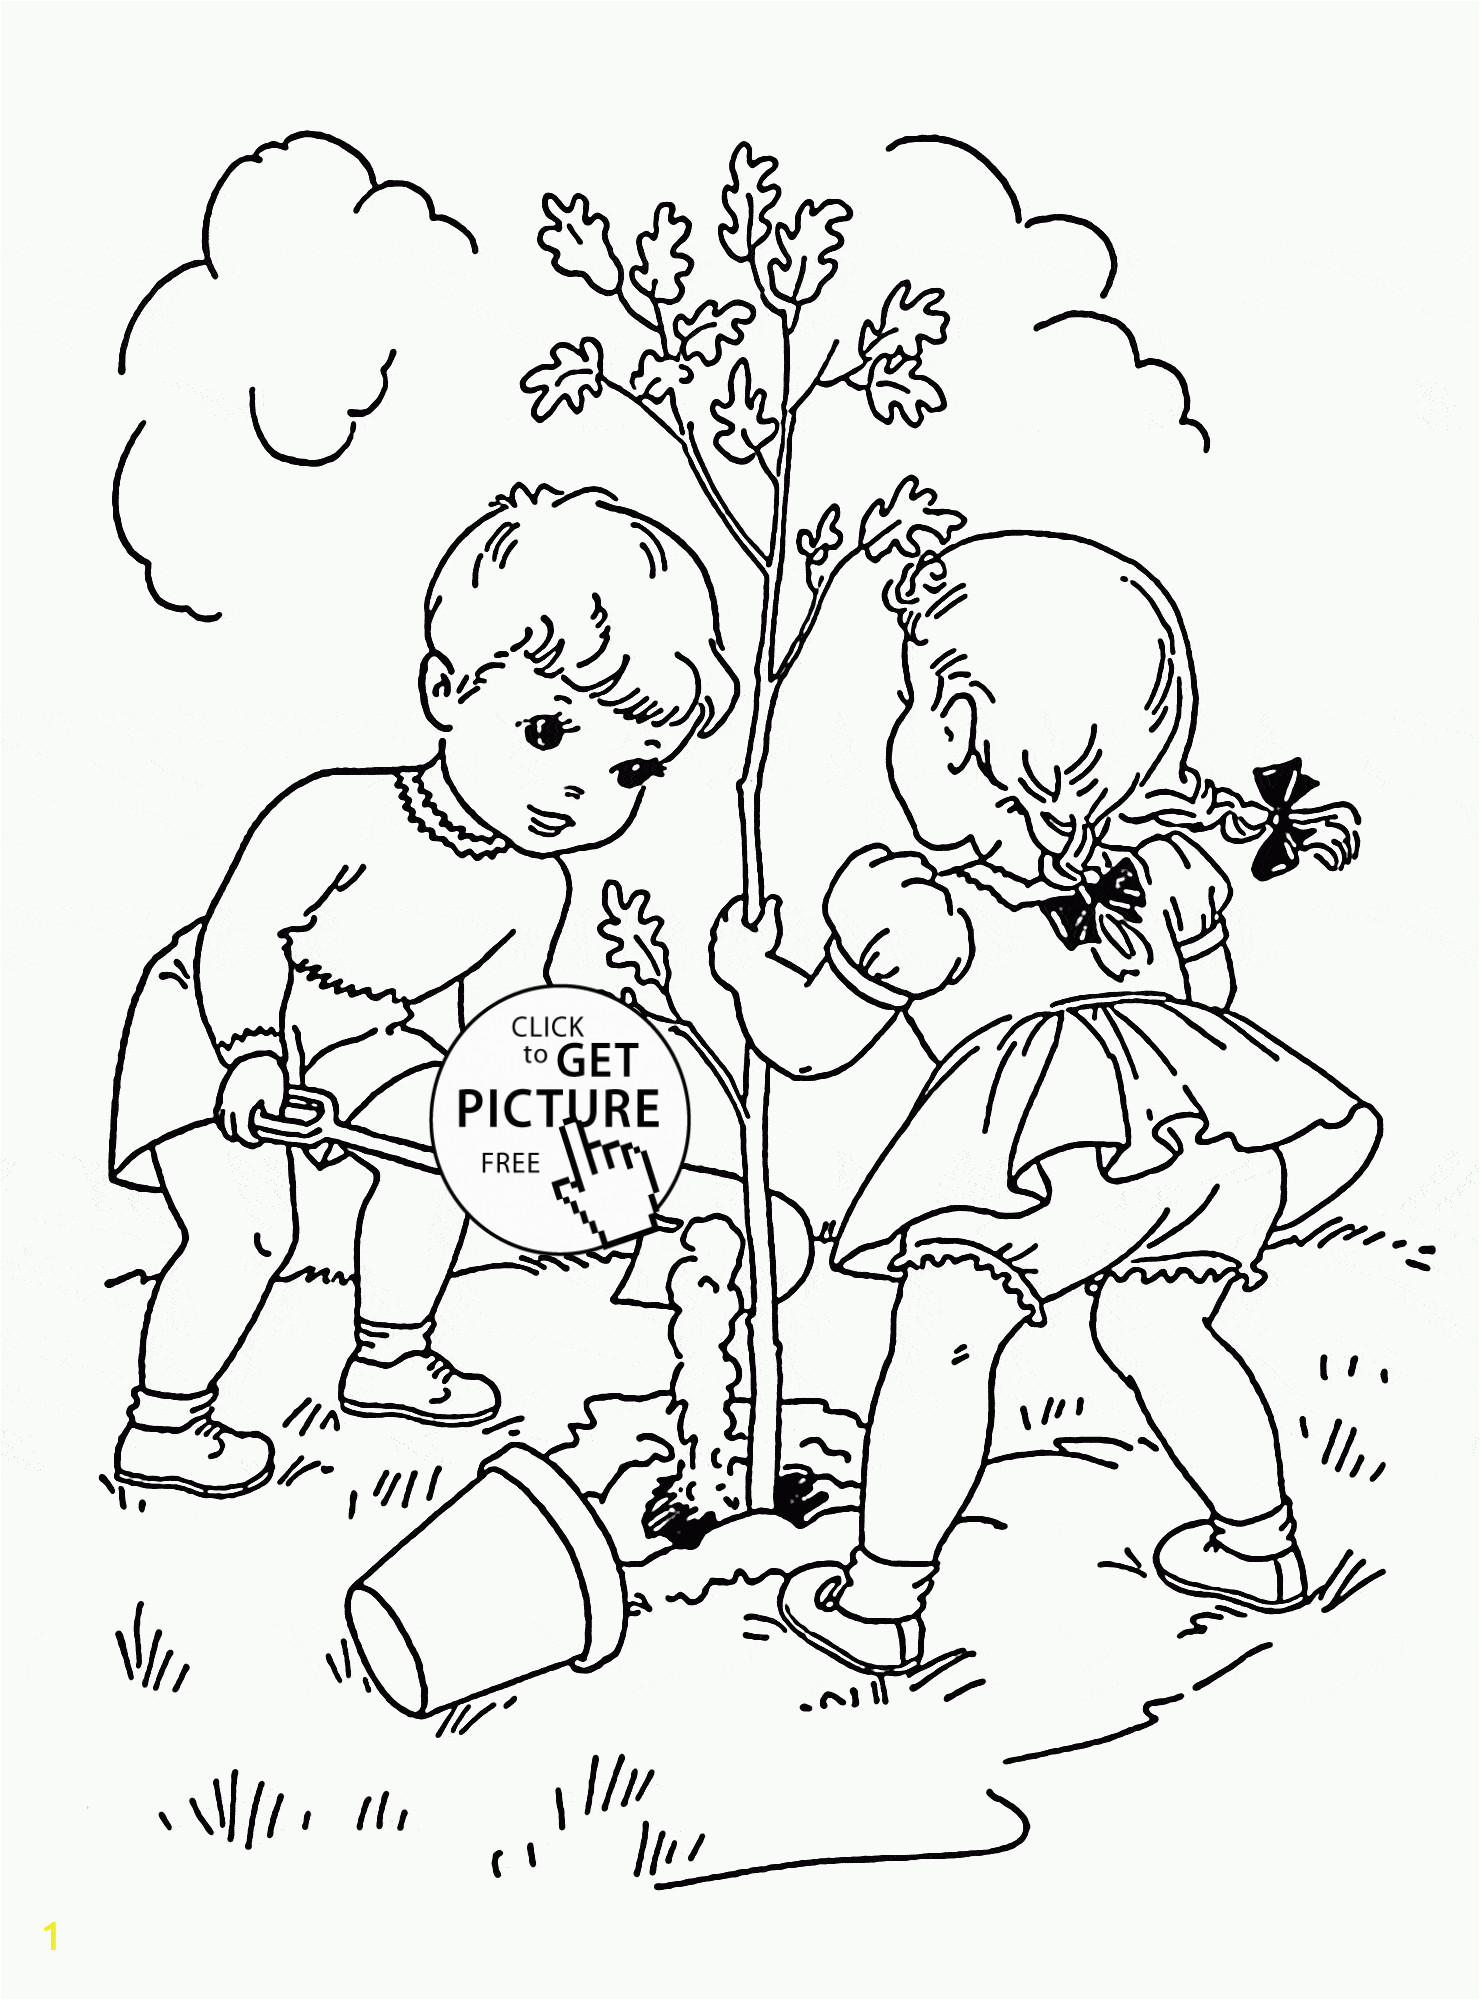 Preschool Coloring Pages for Spring Children Plant Tree Coloring Page for Kids Spring Coloring